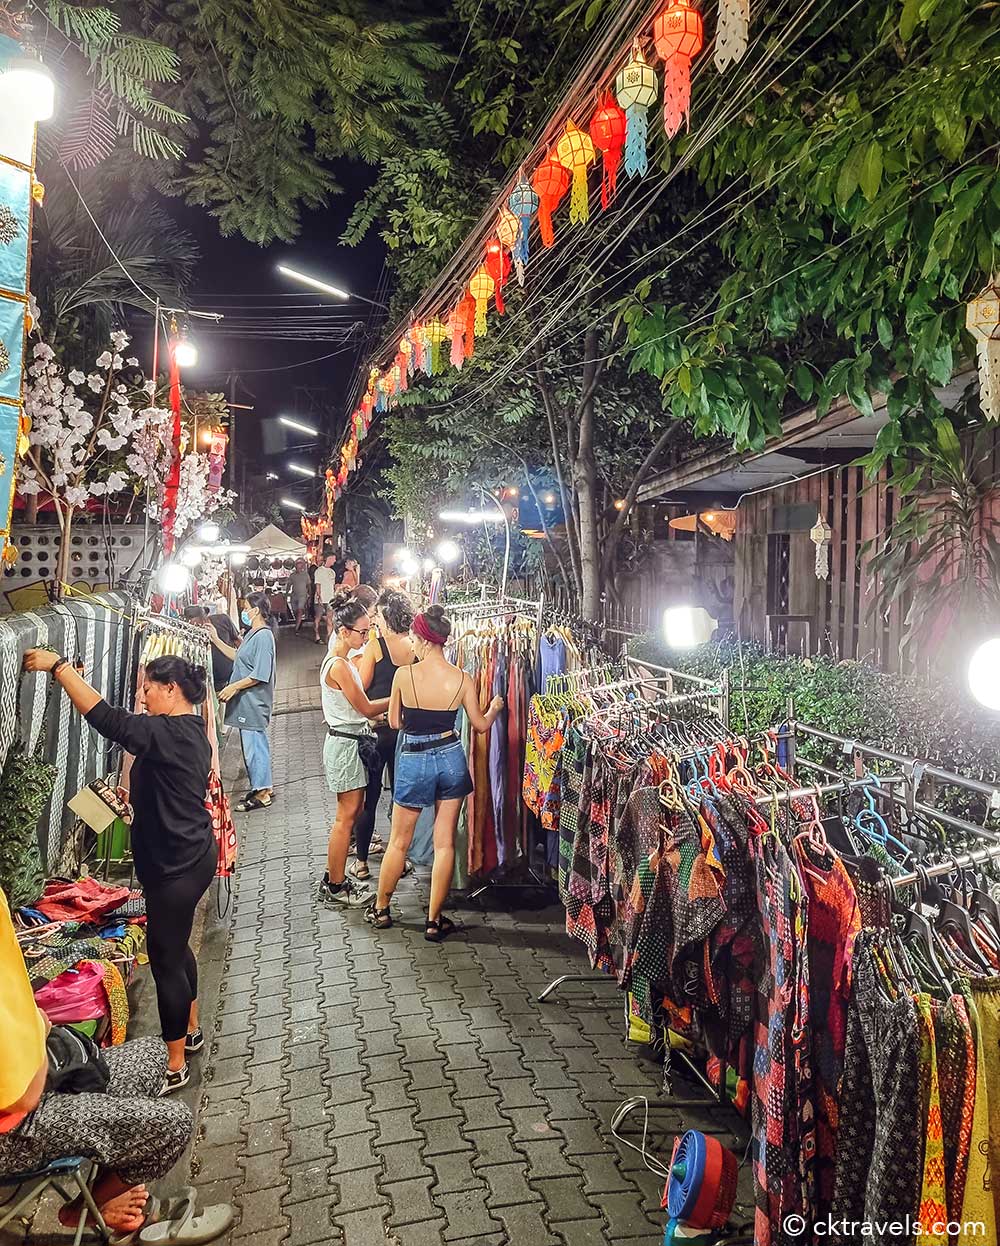 5 Best Markets and Night Markets in Chiang Mai - Where to Go Shopping like  a Local in Chiang Mai? – Go Guides